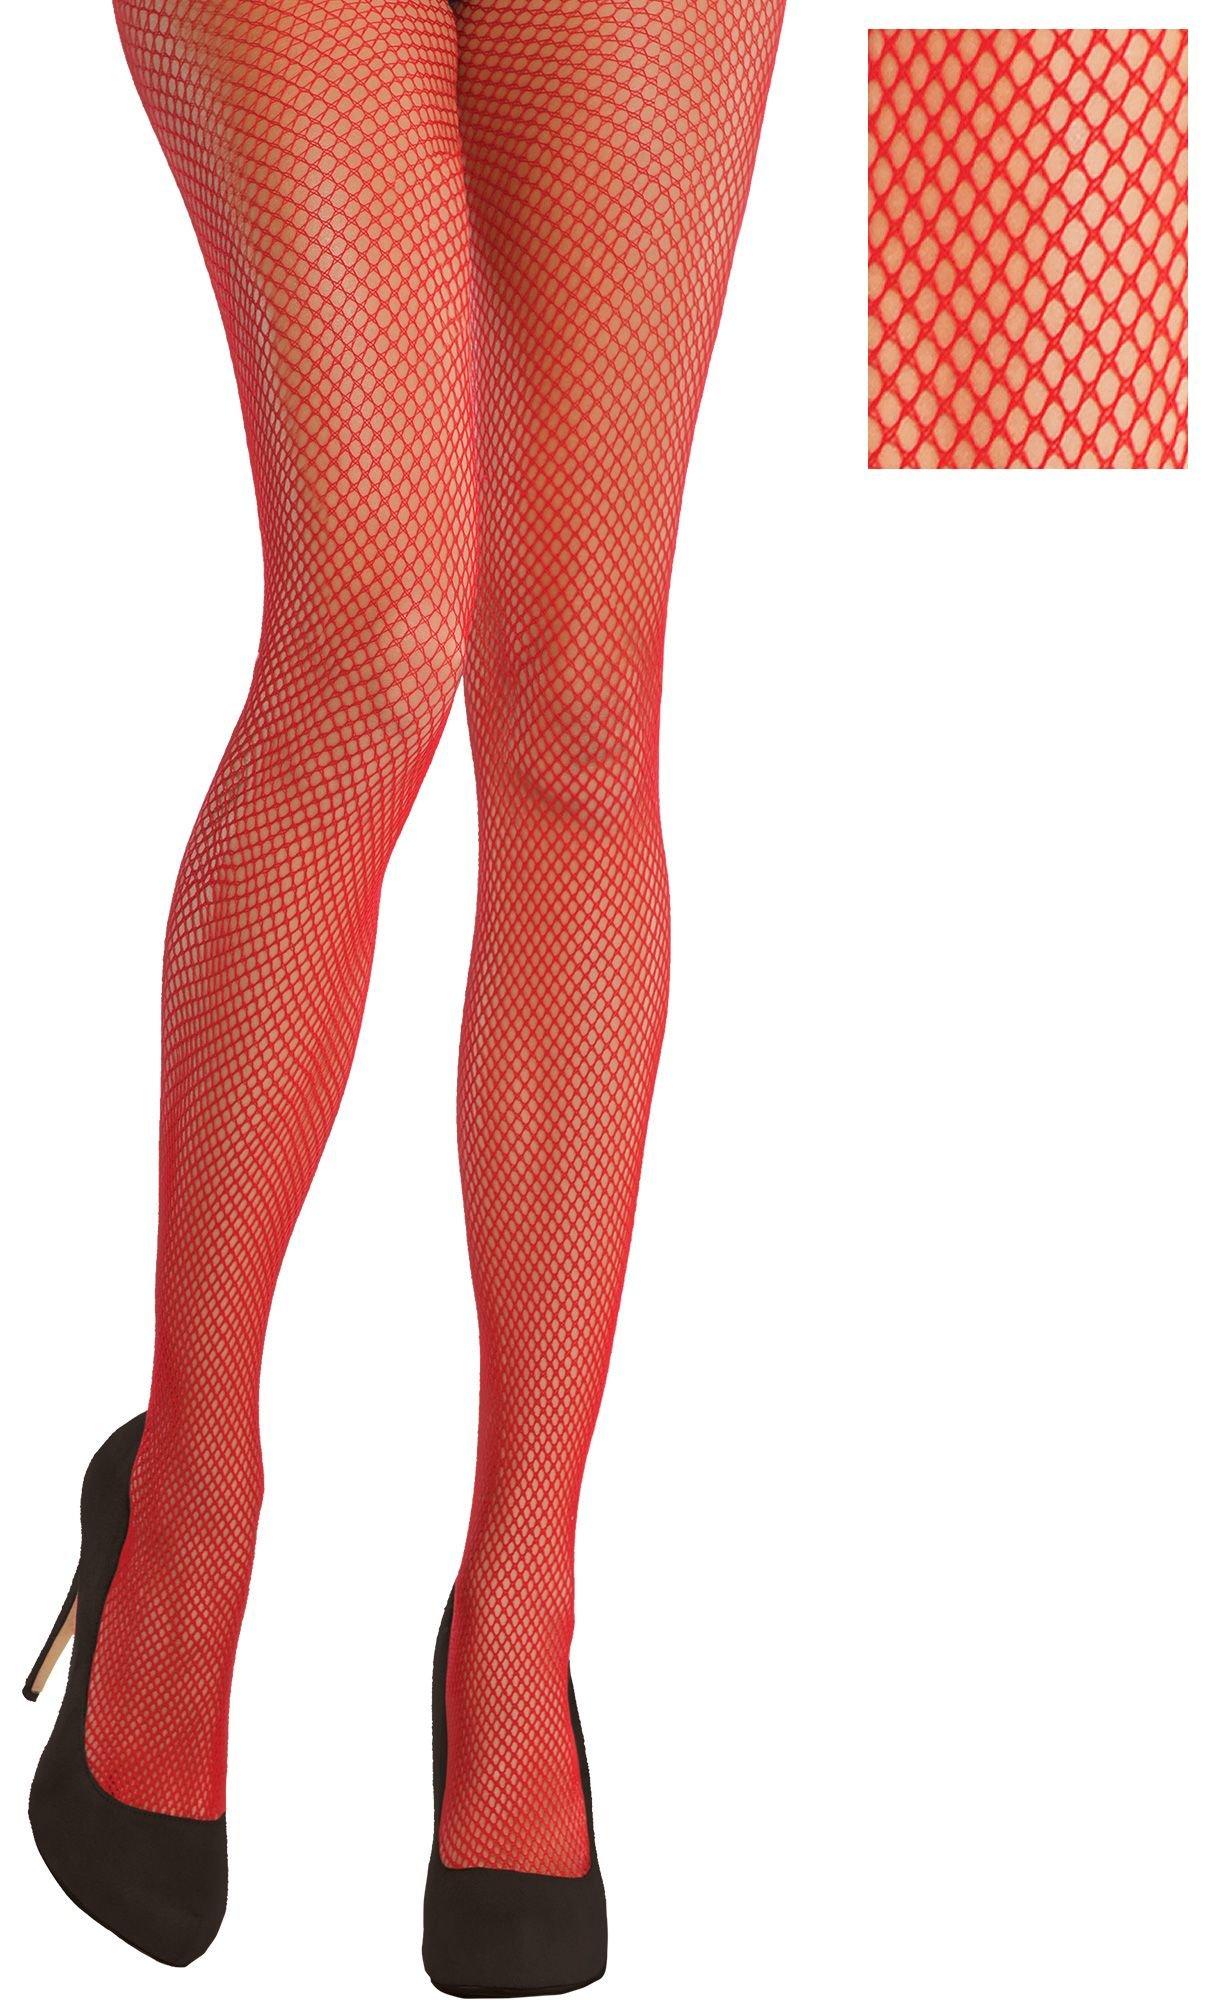 Fishnet Stockings | Party City